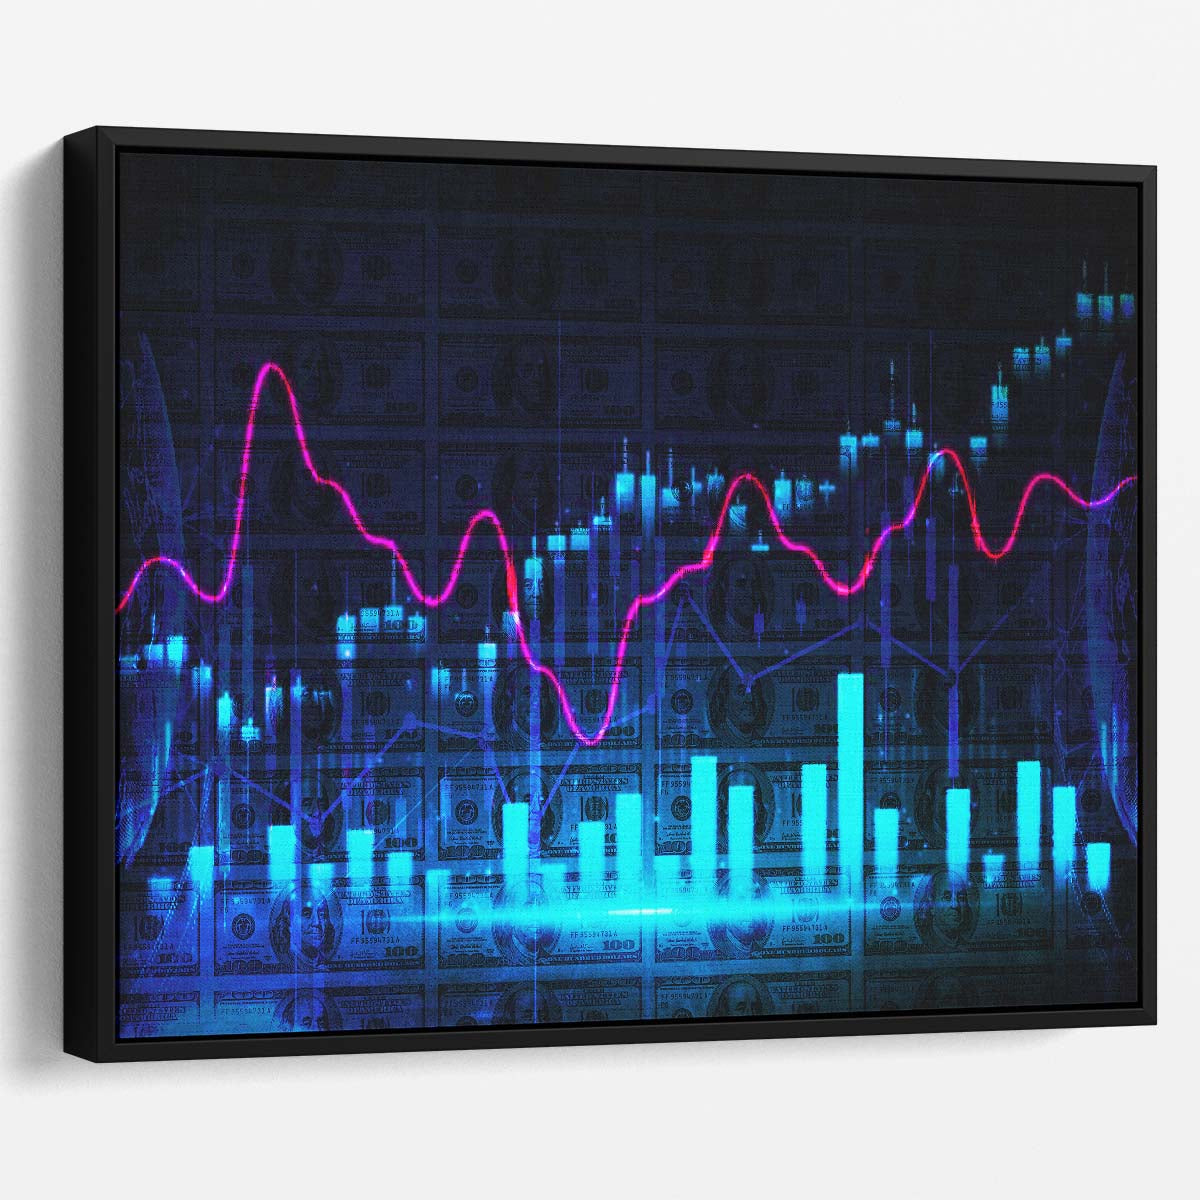 Stock Market Chart Wall Art by Luxuriance Designs. Made in USA.